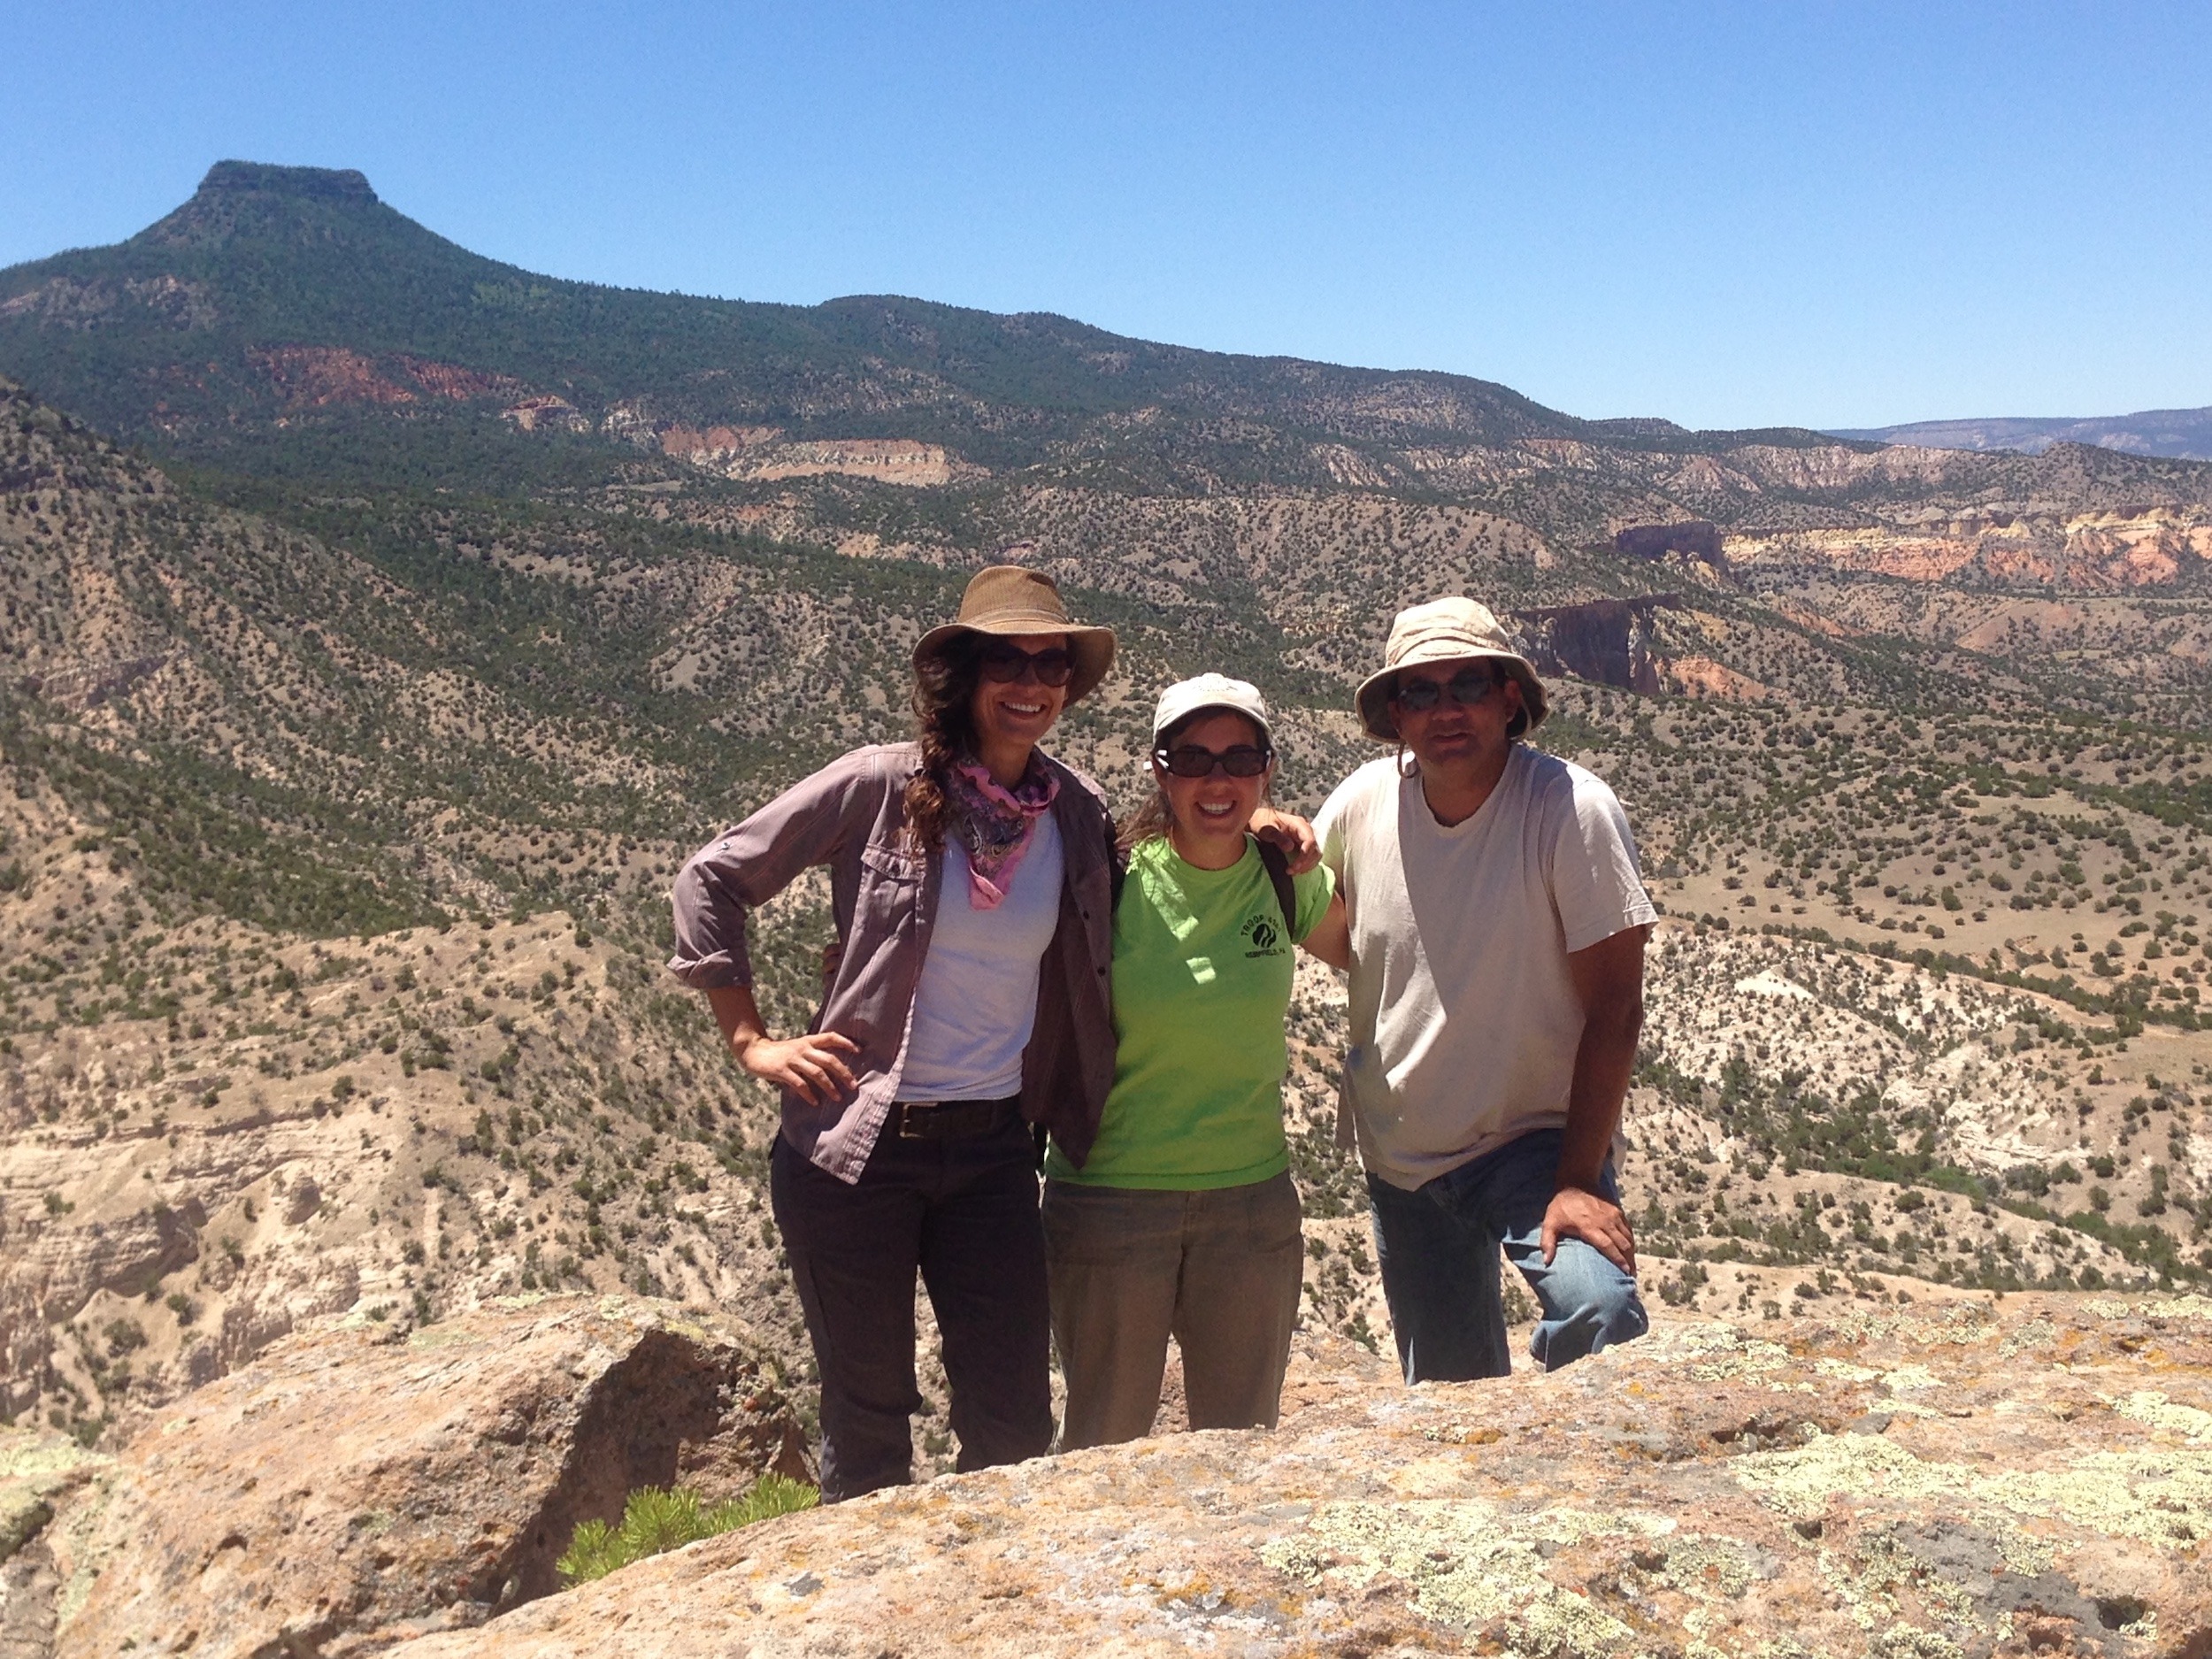 CU Boulder archaeology students Samantha Linford, Kaitlyn Davis and Patrick Cruz at an ancestral site in northern New Mexico.